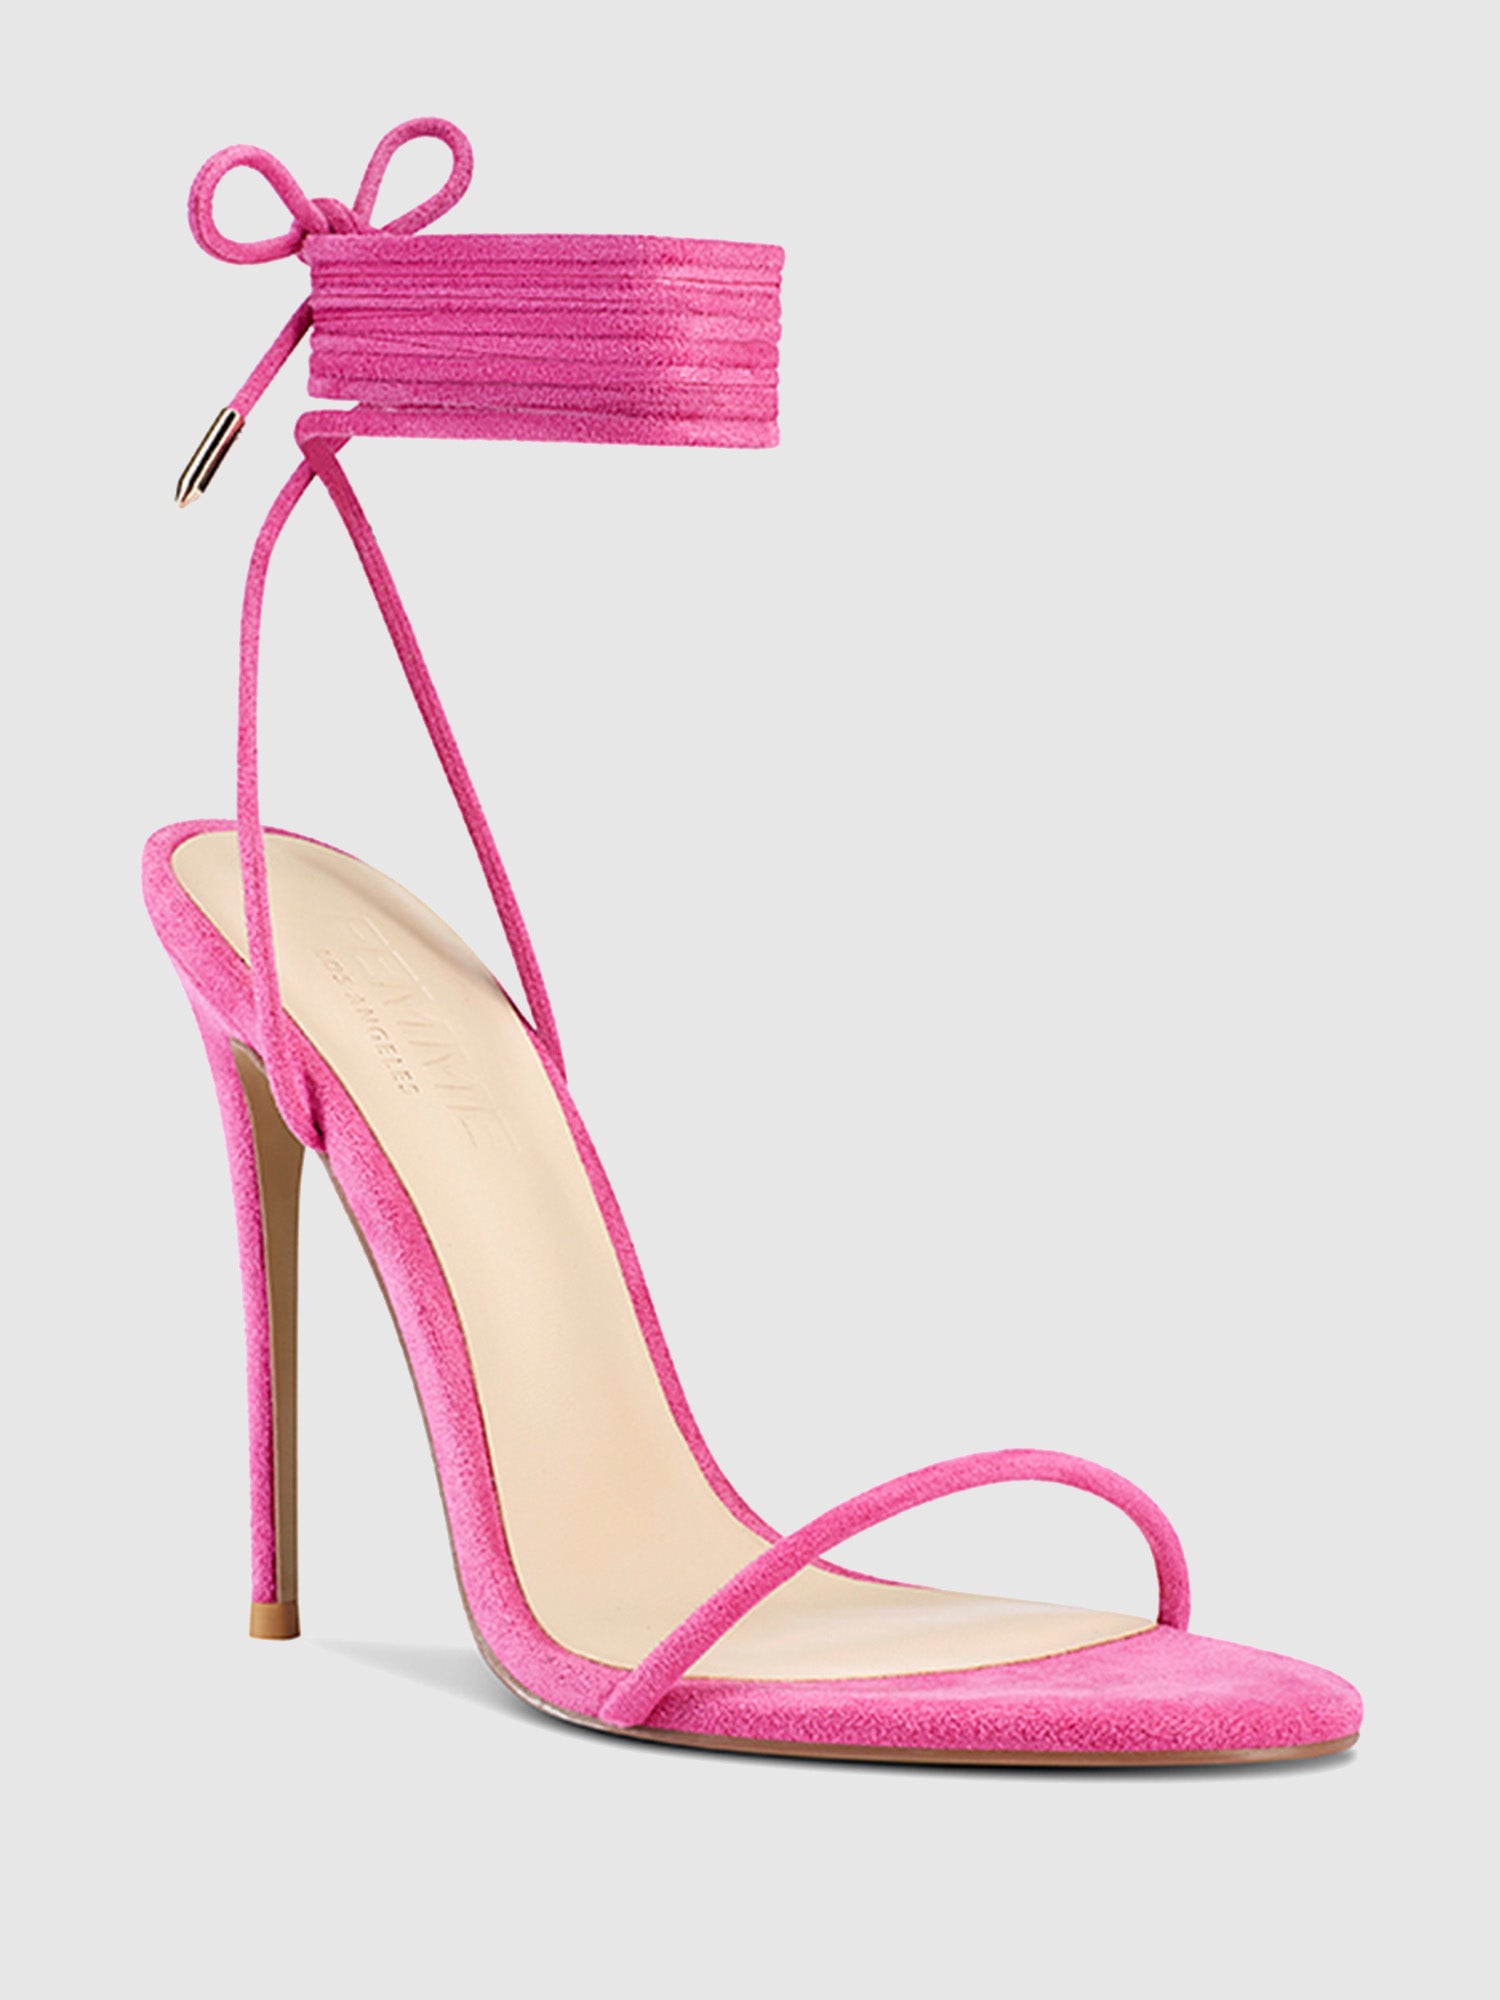 Neon & Hot Pink Shoes, From Heels To Vans To Channel Your Barbie Aesthetic  - The Mood Guide